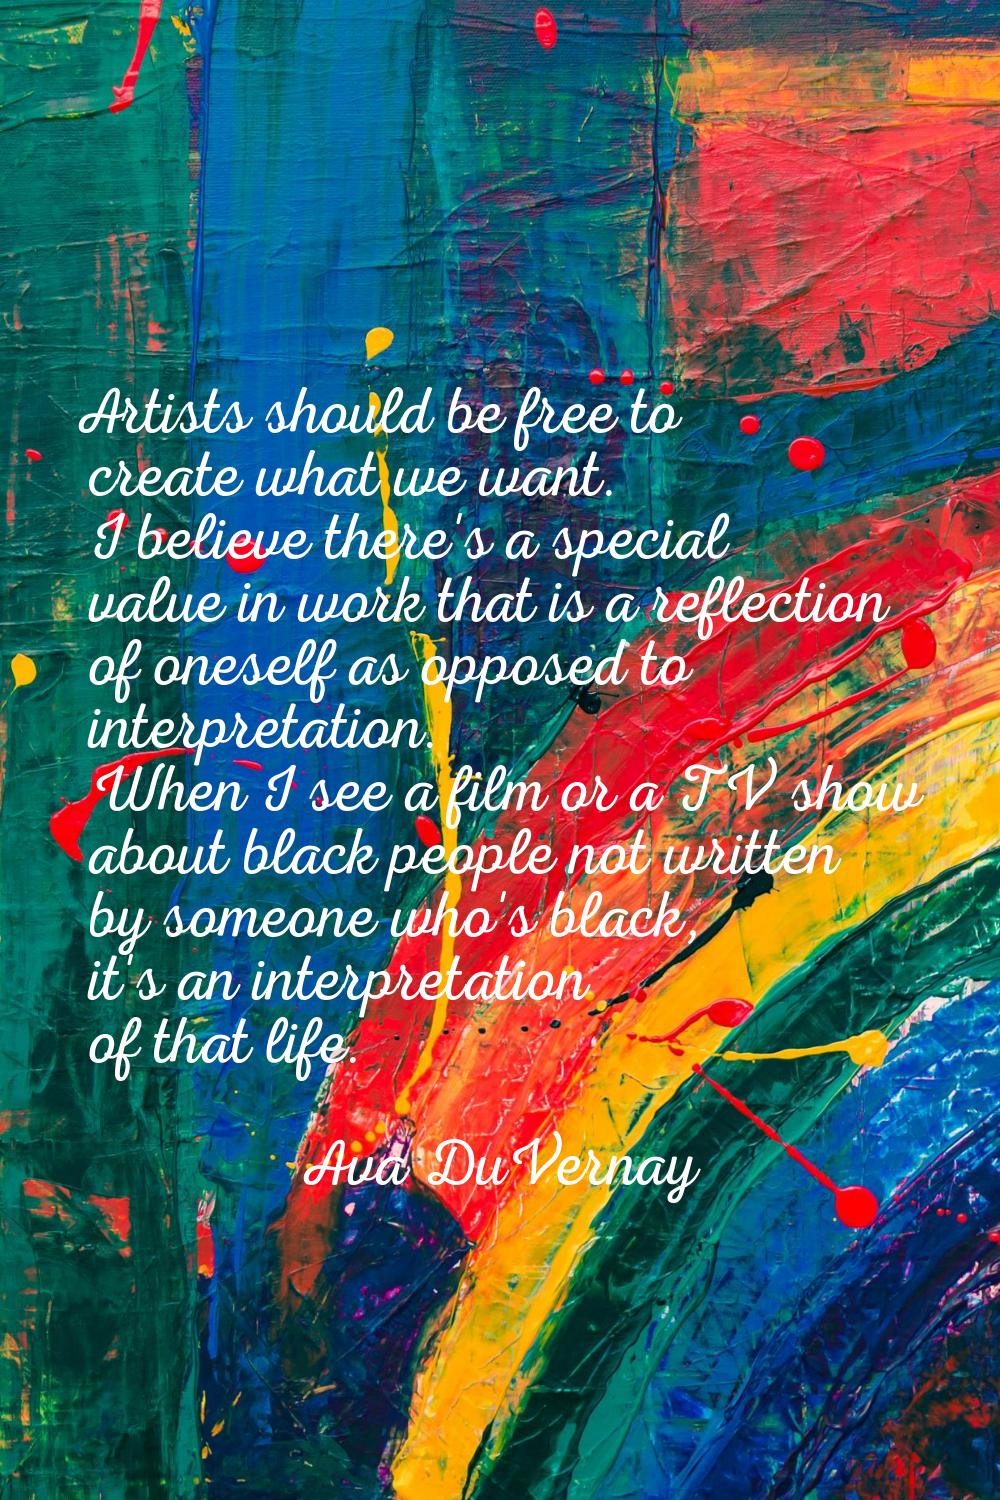 Artists should be free to create what we want. I believe there's a special value in work that is a 